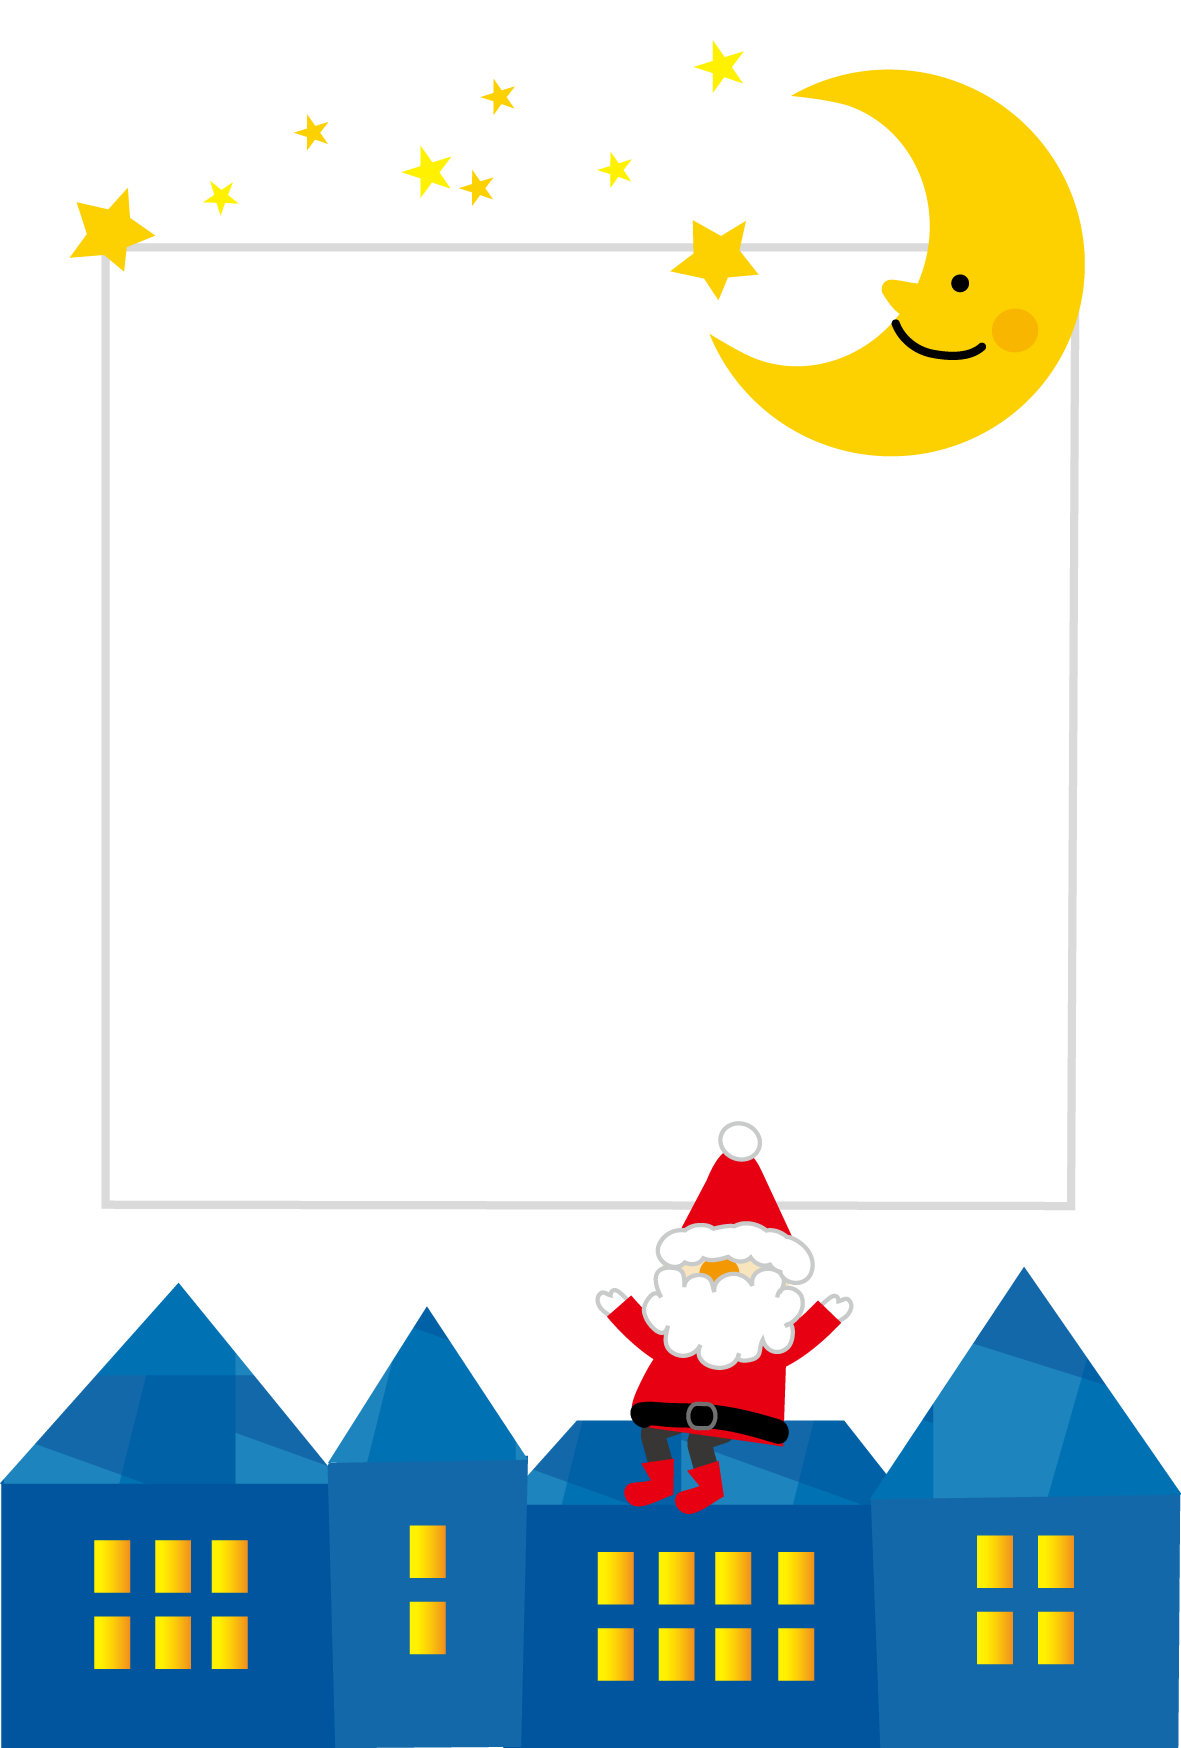 Yahoo Mail Icon クリスマス カード 素材 無料 1181x1748 Png Clipart Download